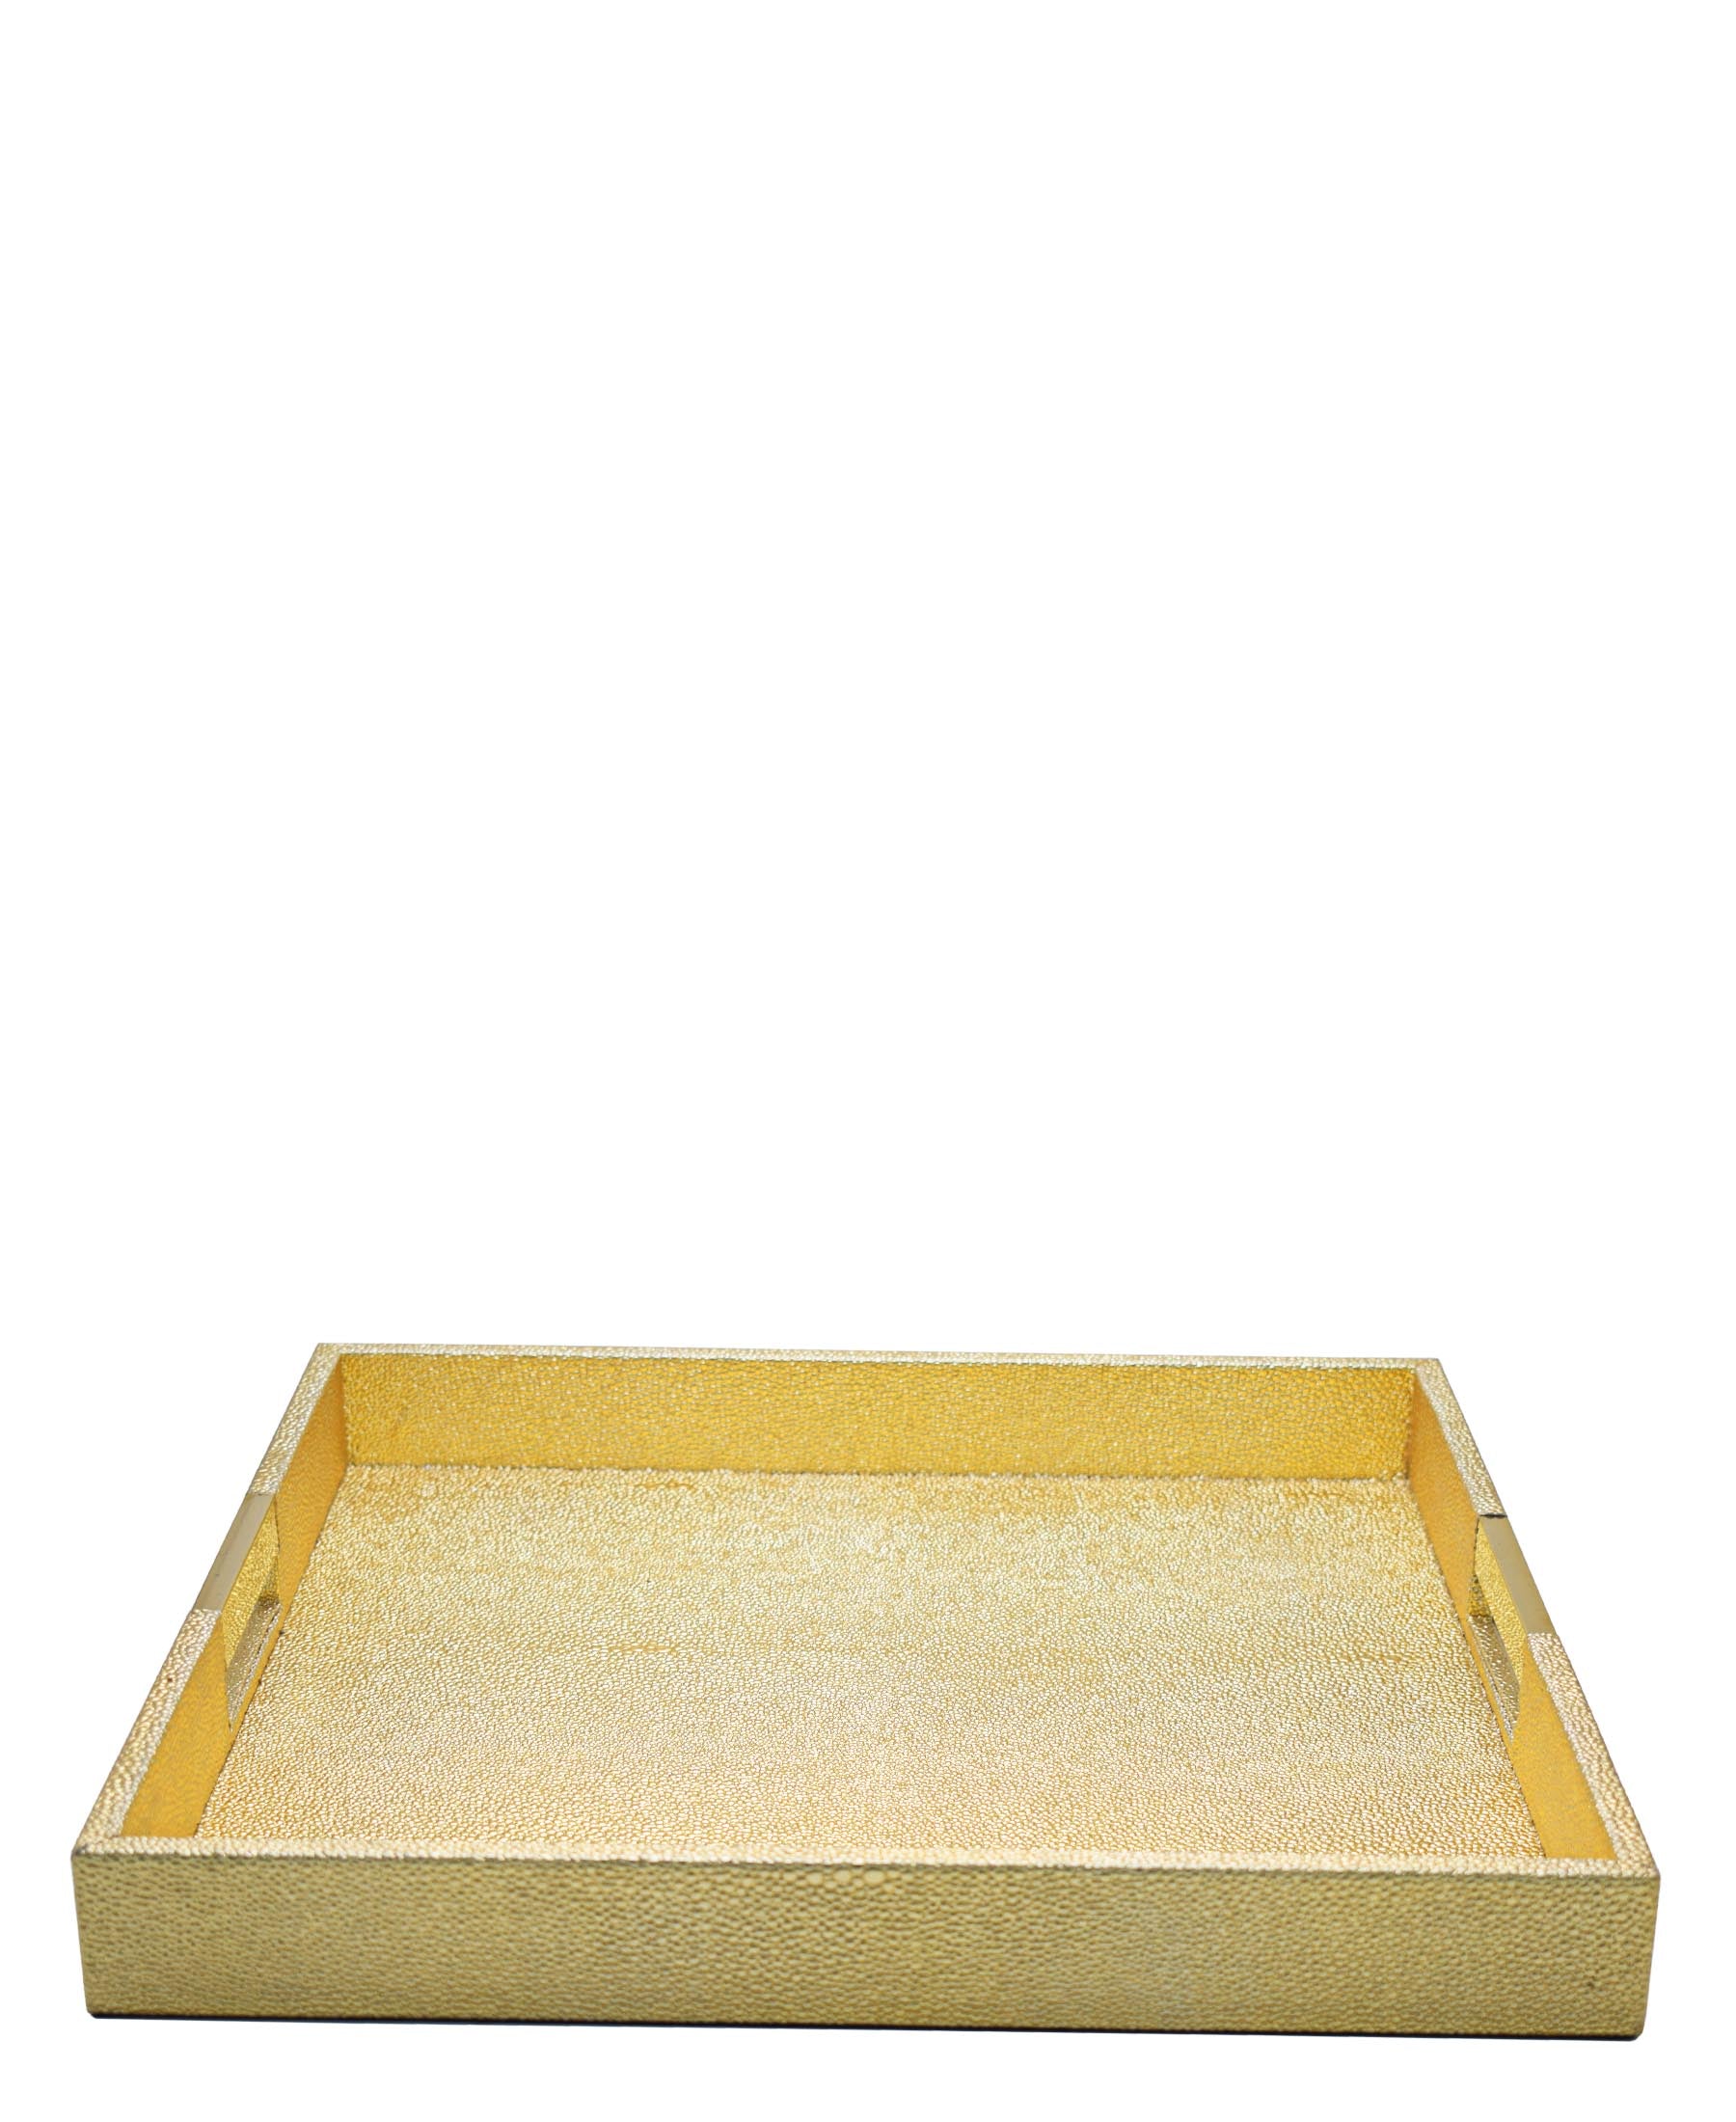 Golden 2 Piece Tray Set Pu Leather - Gold